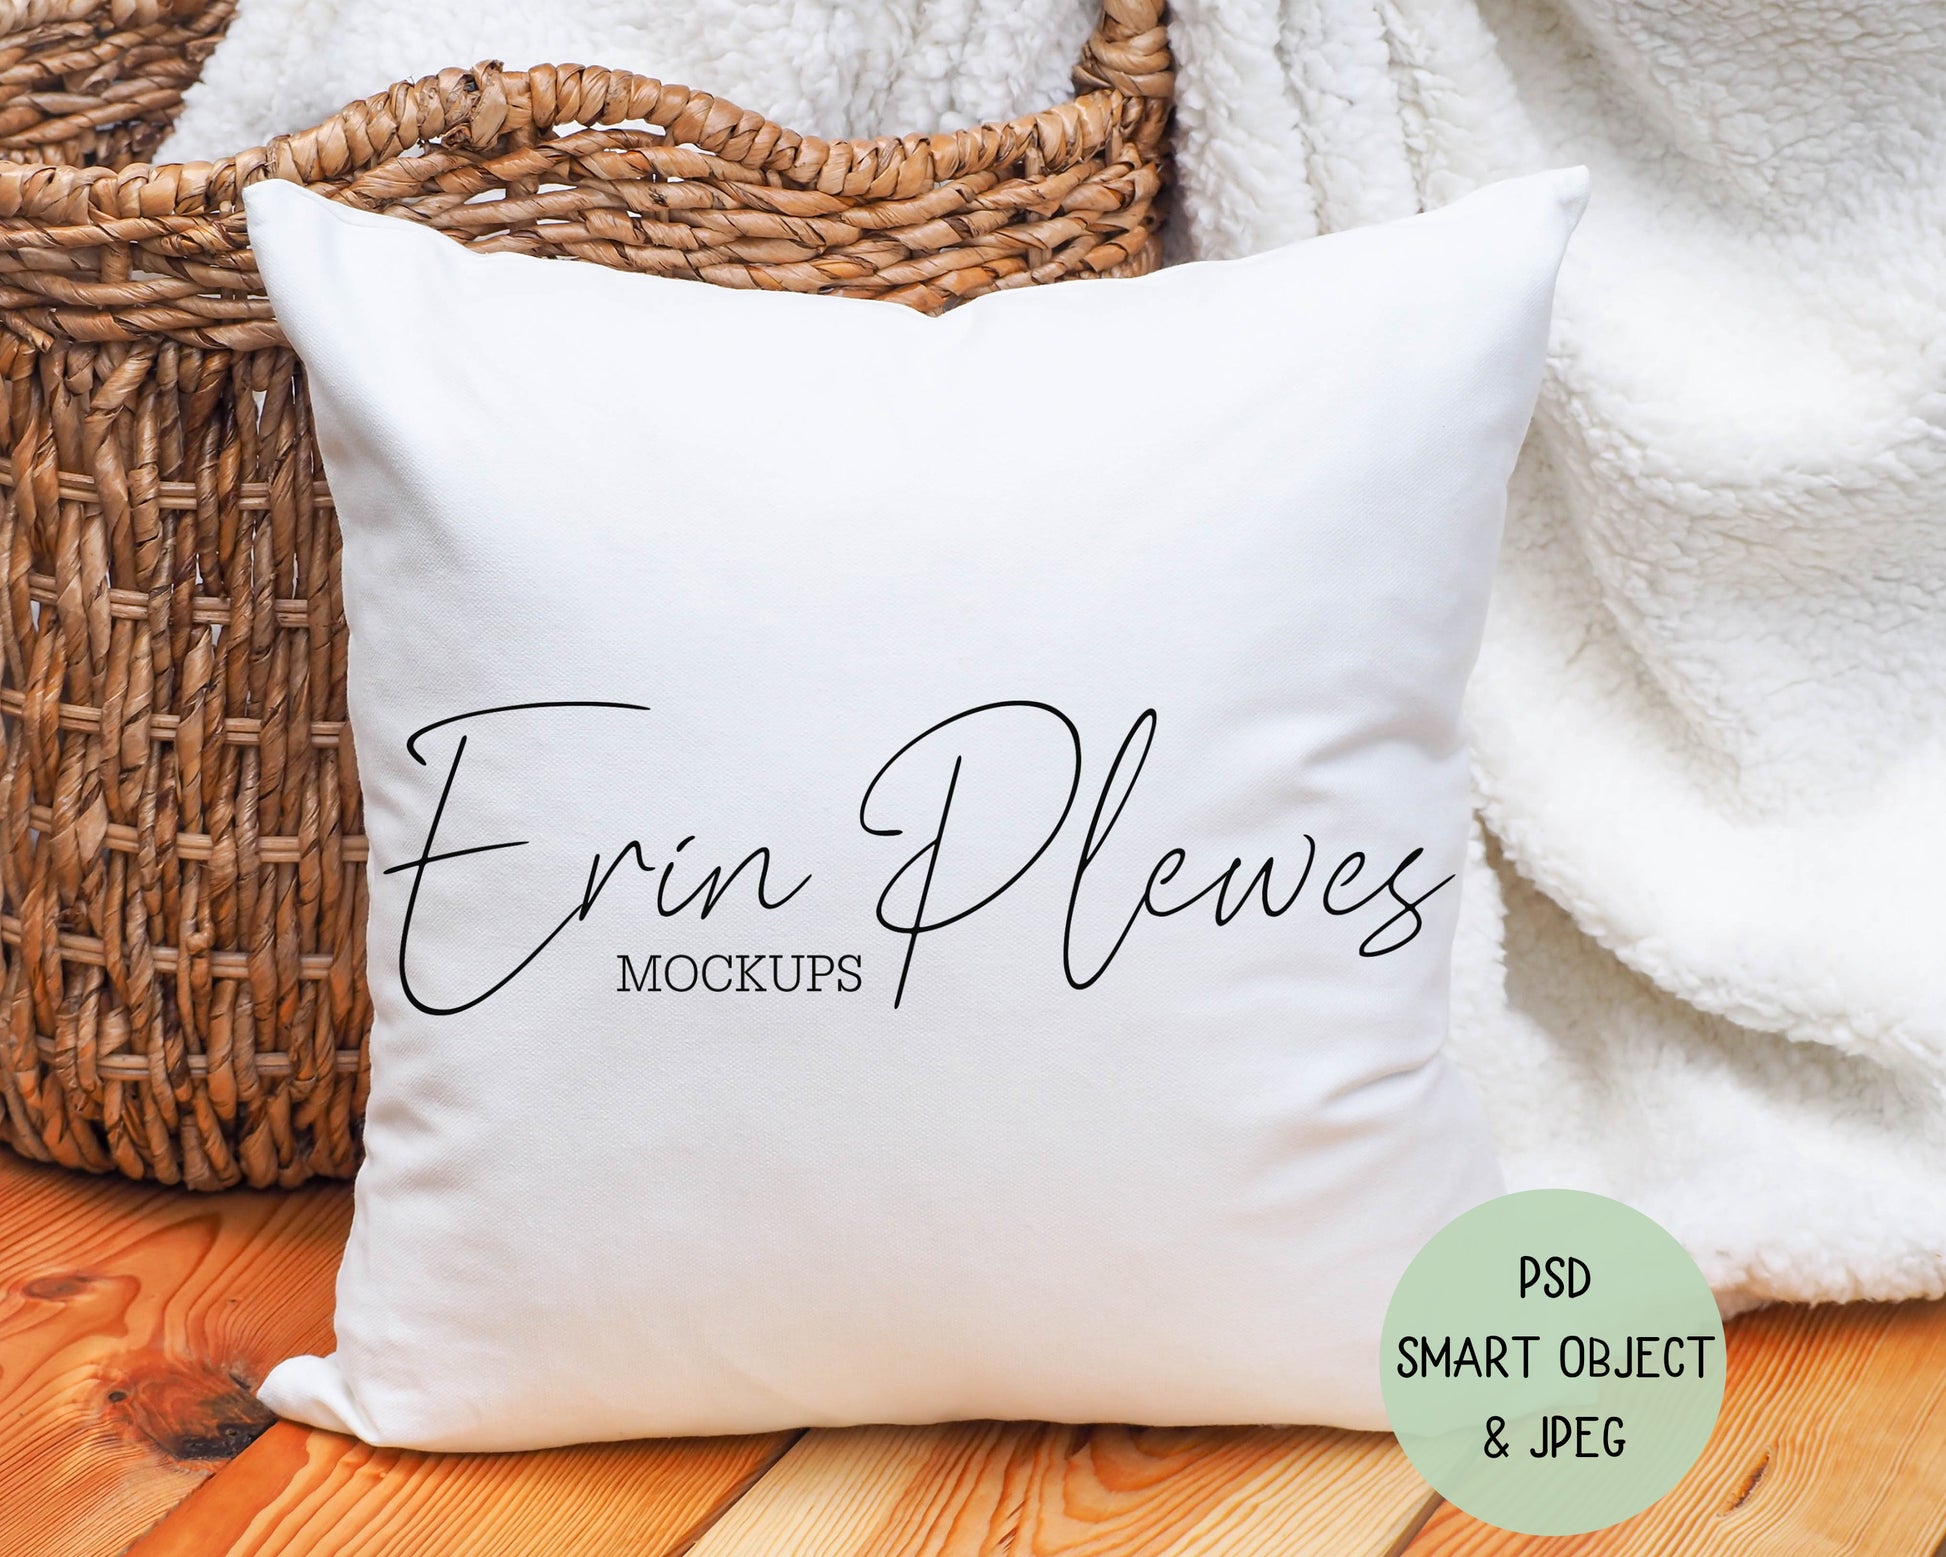 Pillow Mockup, Square Pillow Mock Up PSD Smart Object, Cushion Lifestyle Stock Photo, White Pillow Case Mock-up Digital Download Template